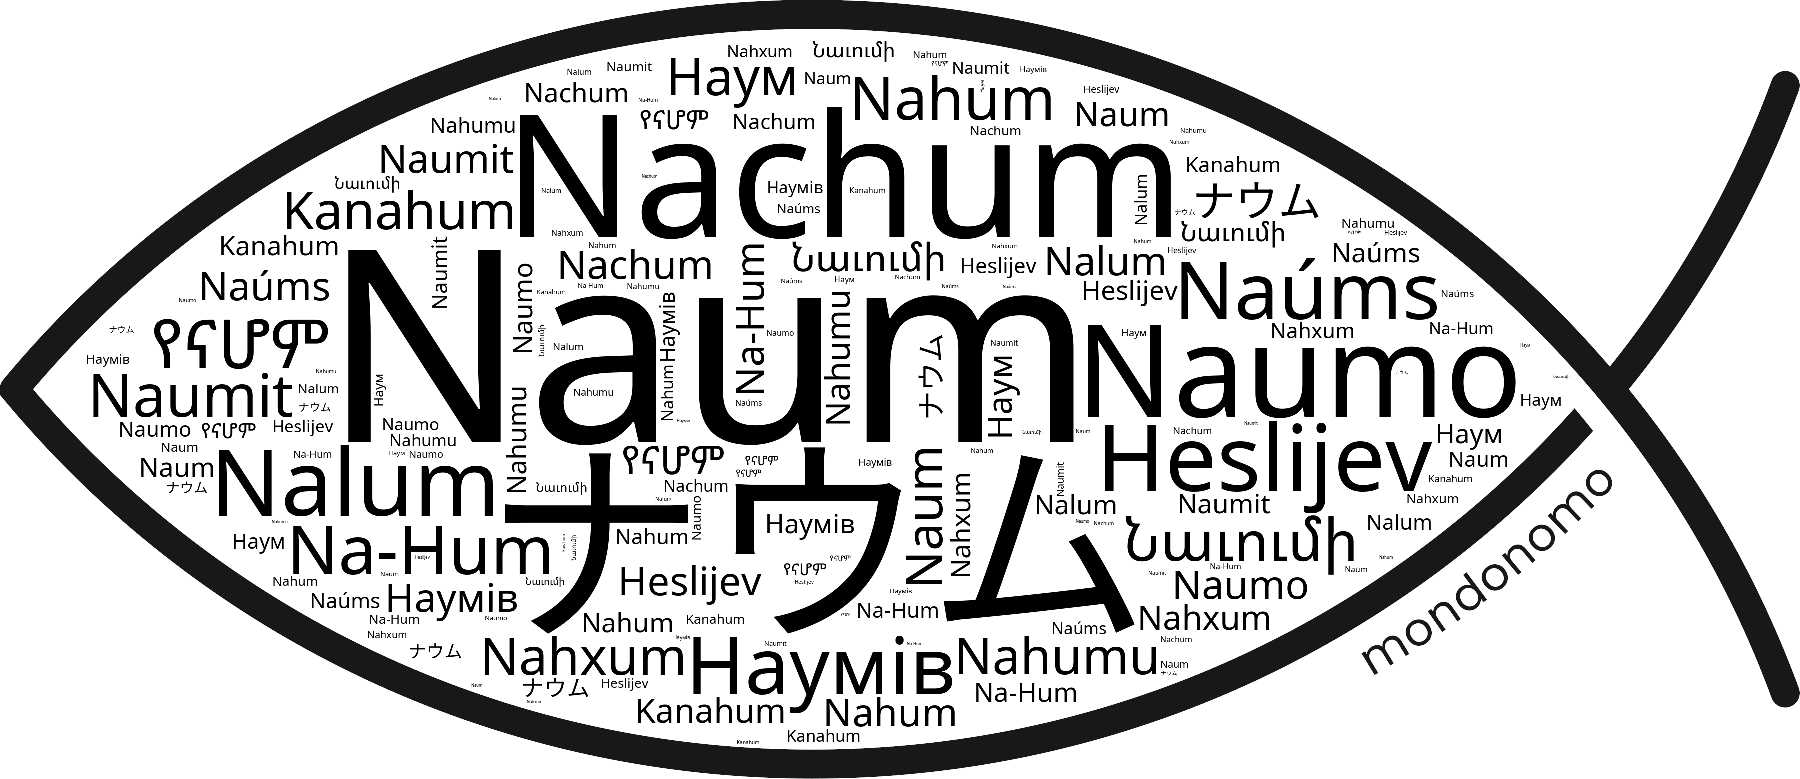 Name Naum in the world's Bibles